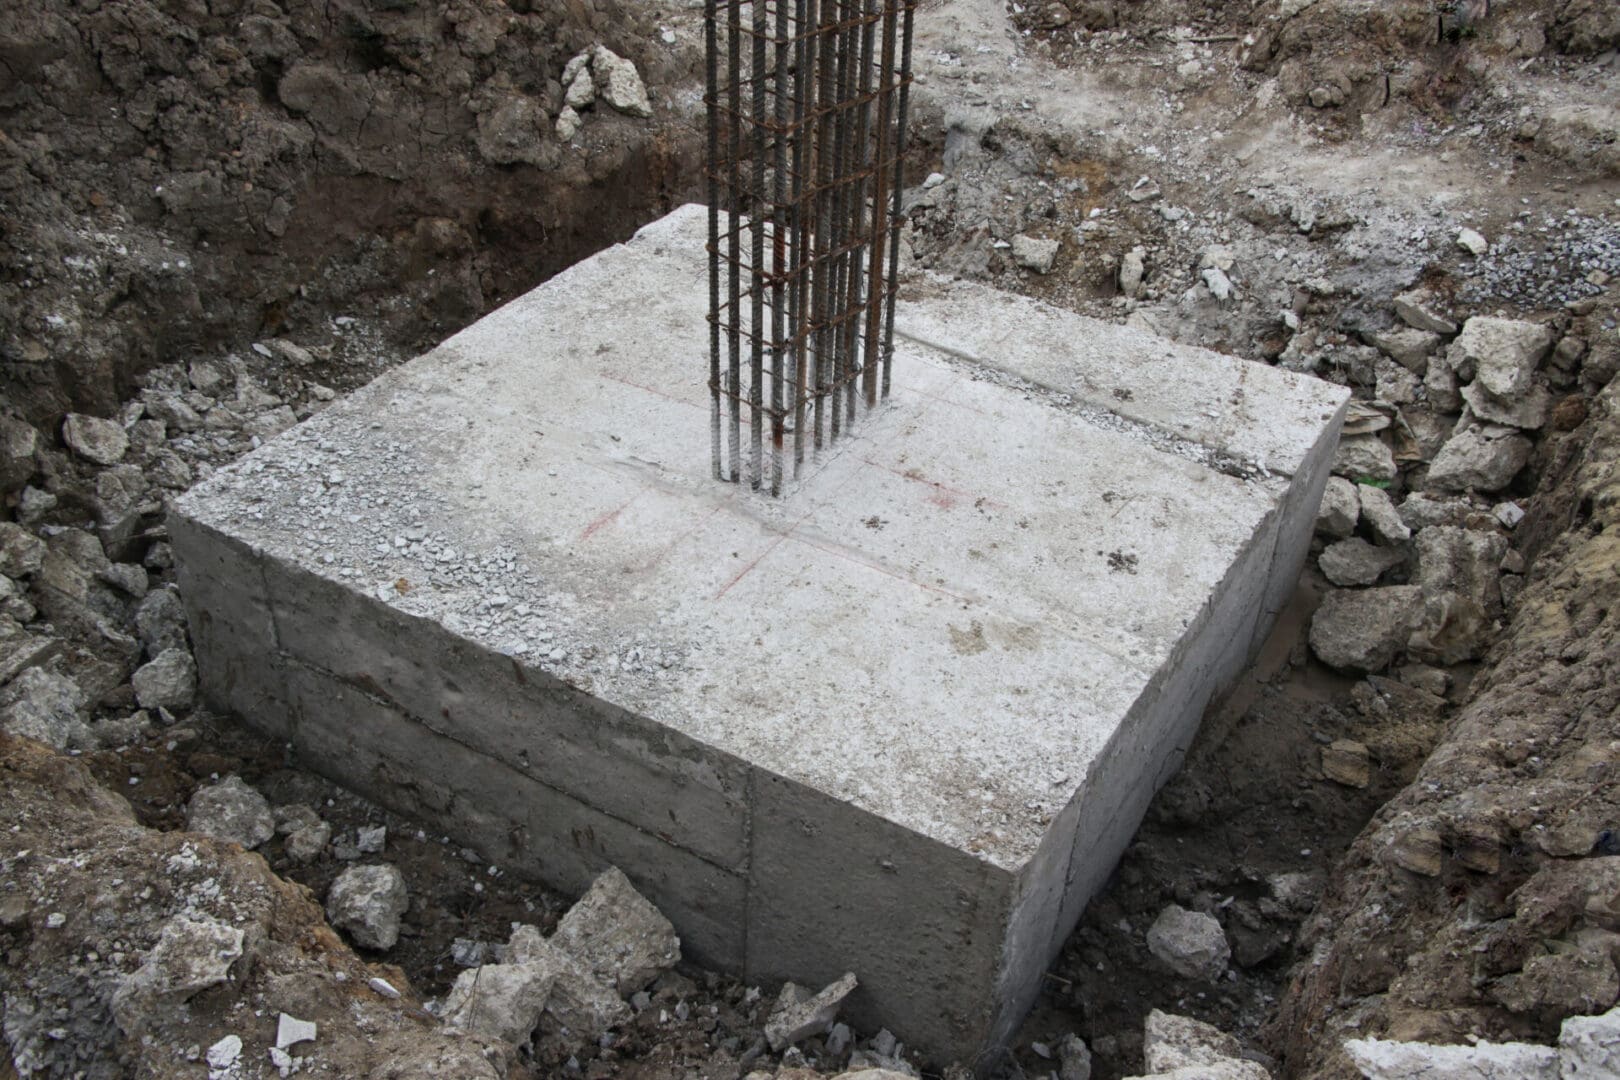 A concrete slab with a metal rod in it.